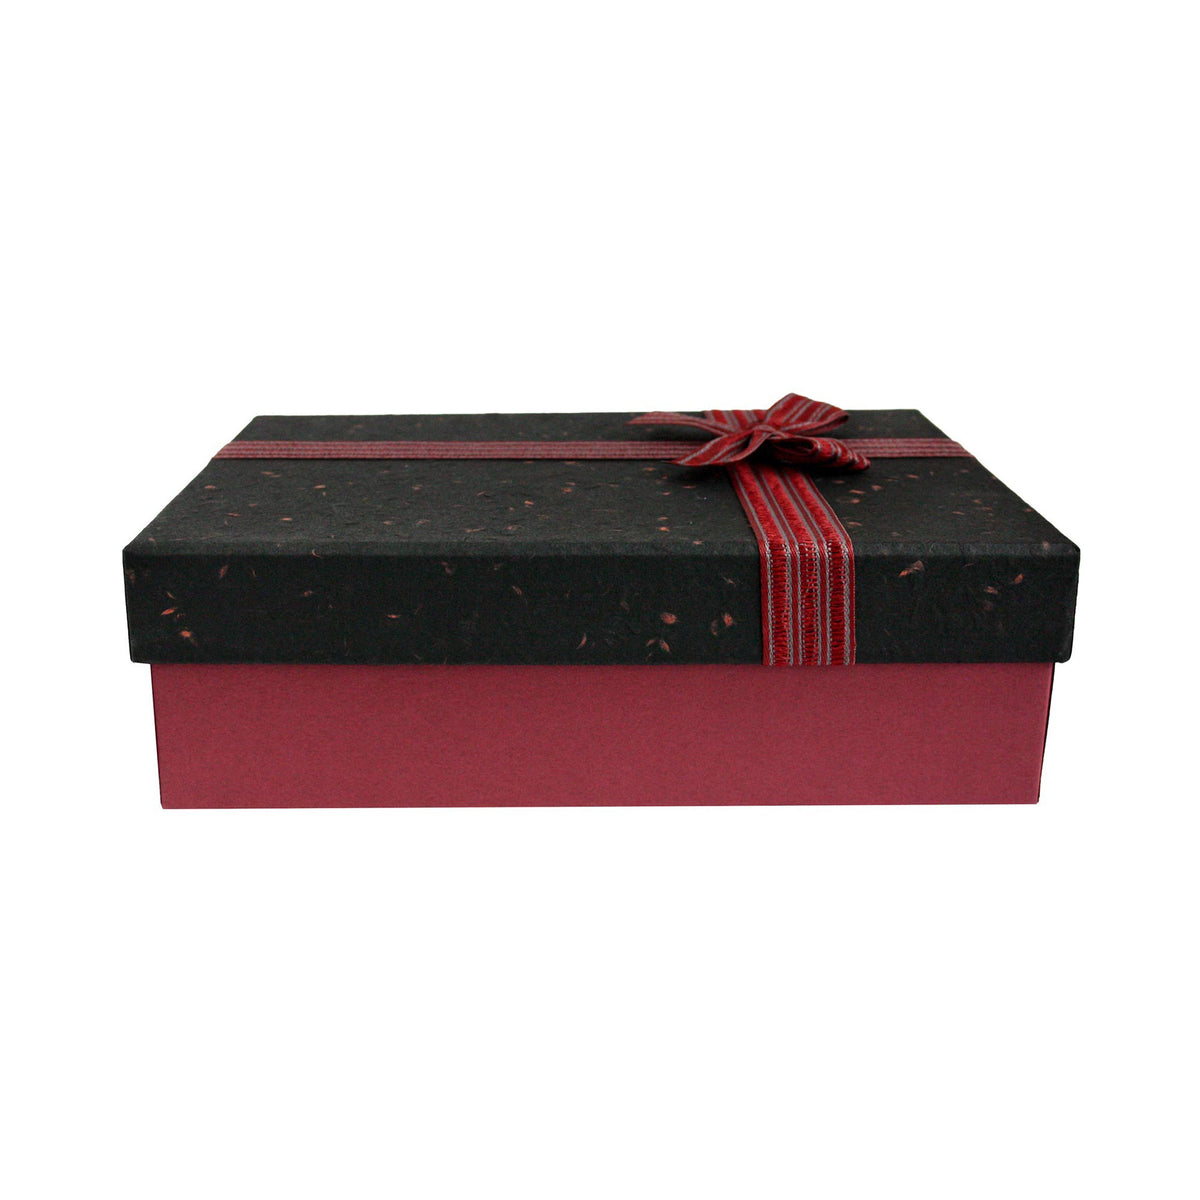 Single Burgundy/Black Gift Boxes With Red Striped Ribbon